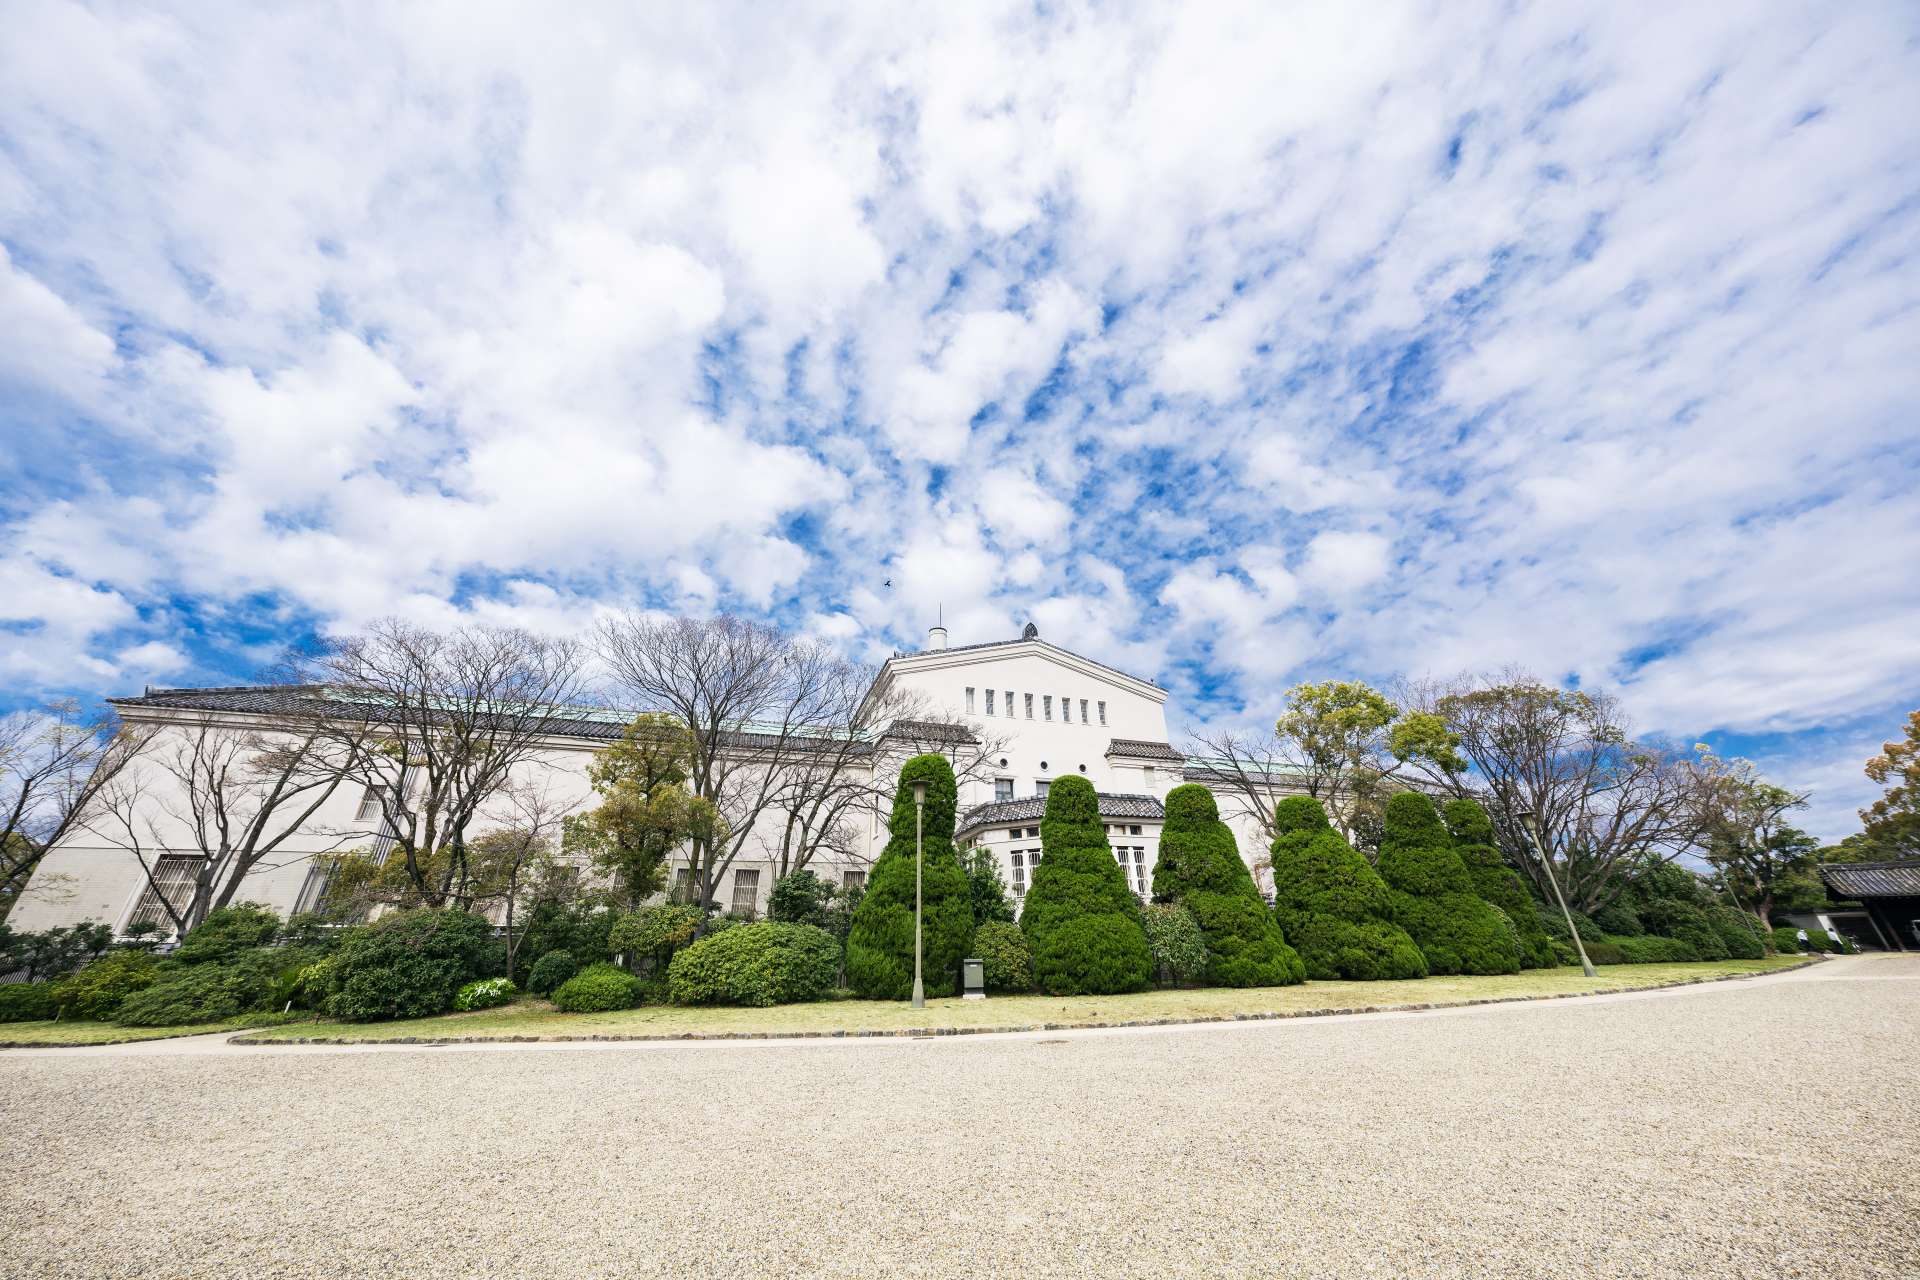 The Osaka City Museum of Fine Arts was opened in the corner of Tennoji Park in 1936. Here visitors will find special exhibits featuring Buddhist artwork in addition to other works.